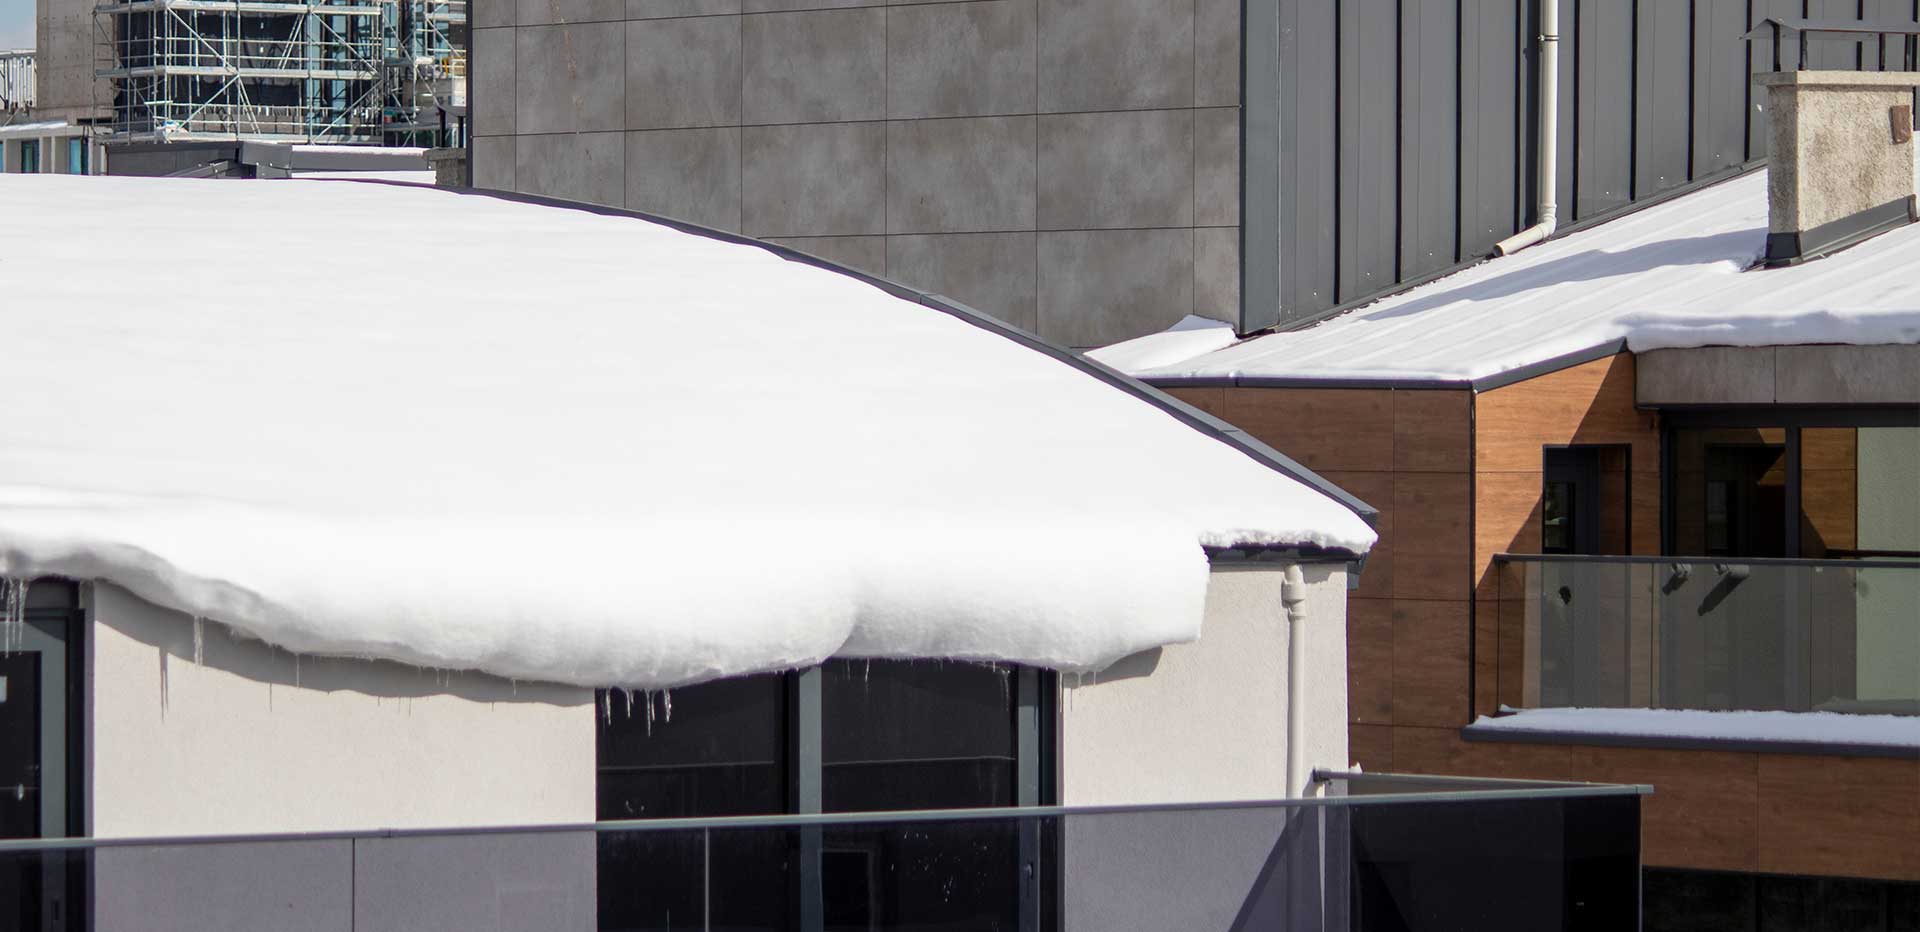 snow on a flat roof